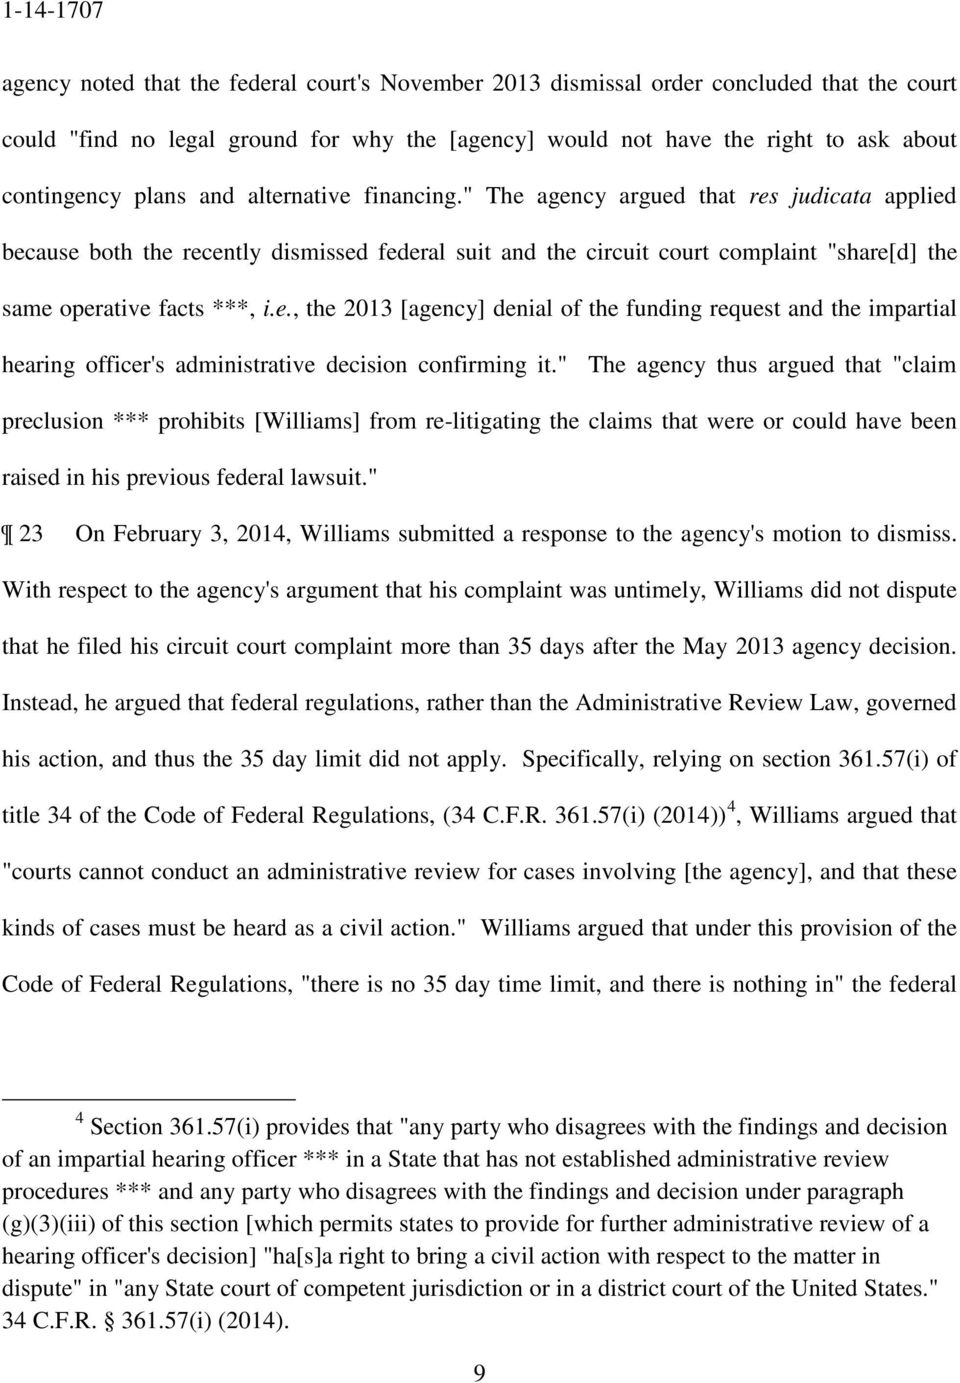 " The agency thus argued that "claim preclusion *** prohibits [Williams] from re-litigating the claims that were or could have been raised in his previous federal lawsuit.